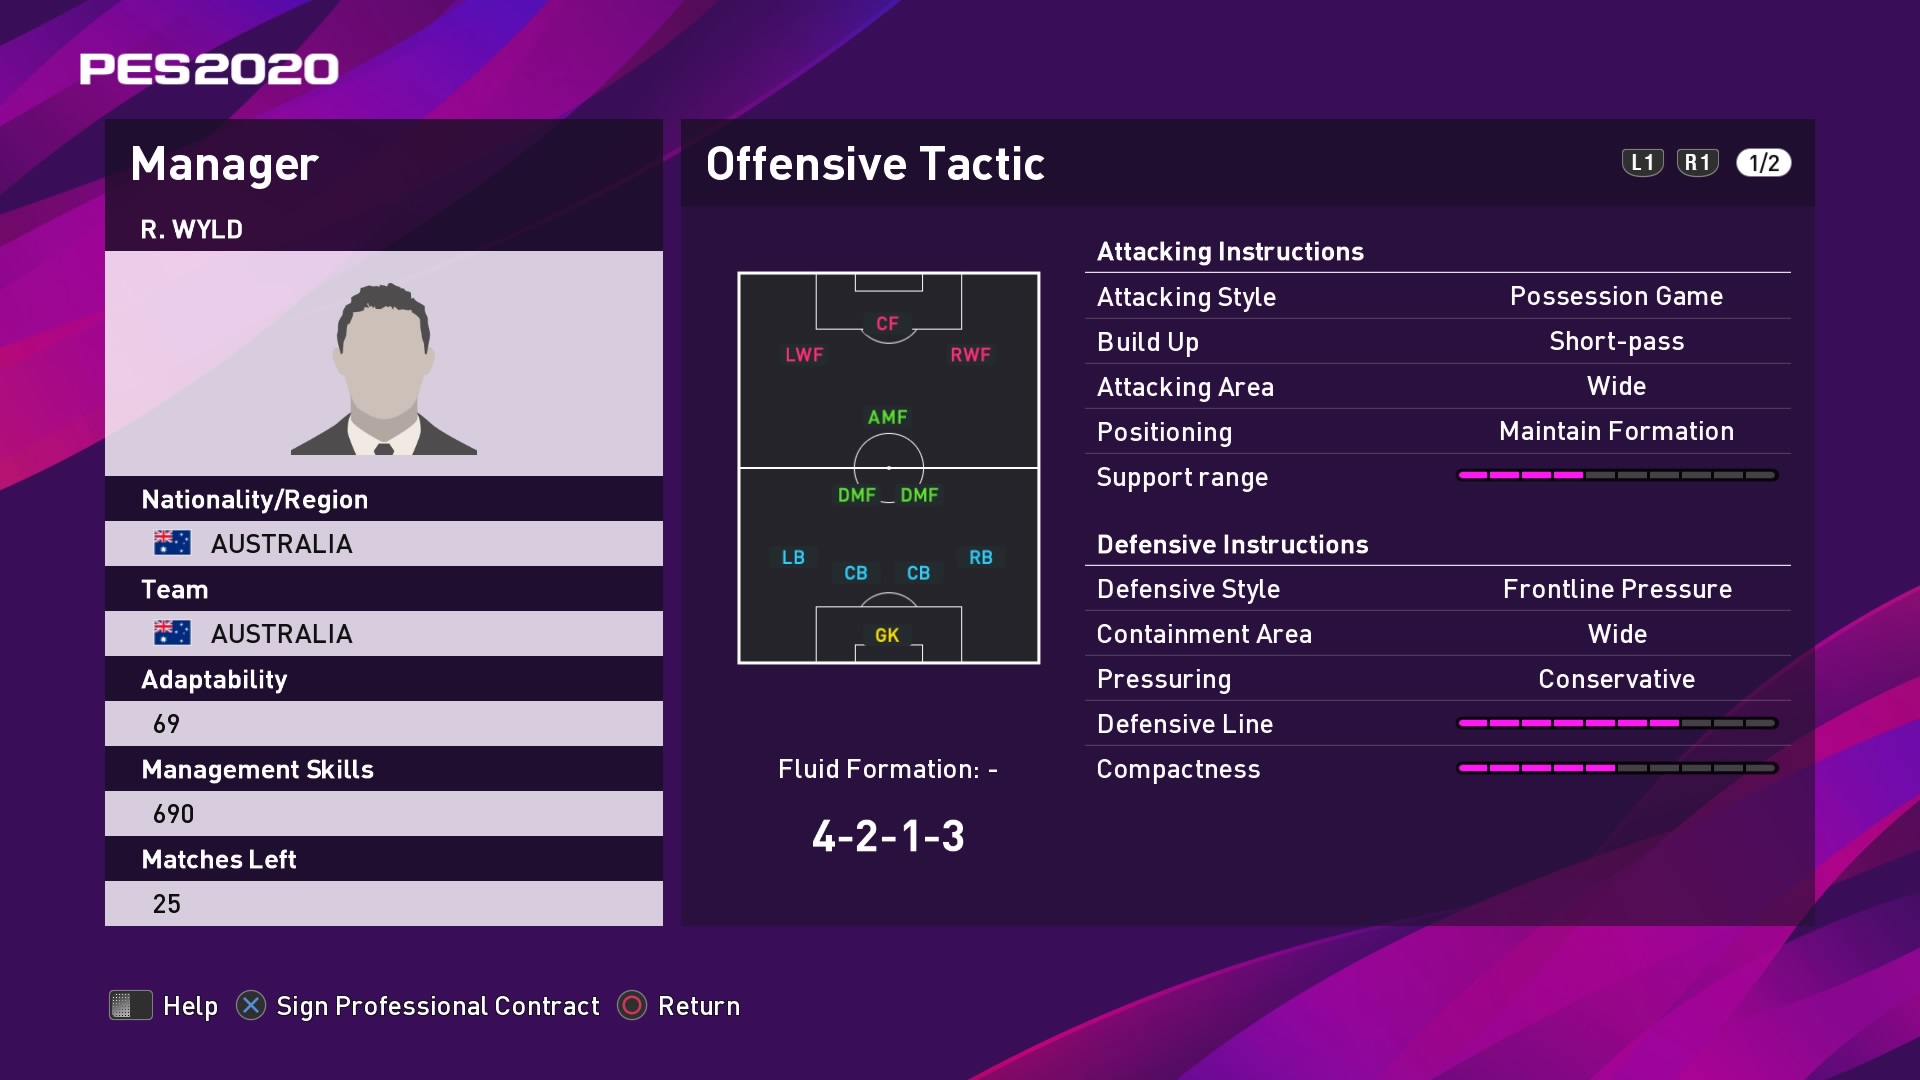 R. Wyld (Graham Arnold) Offensive Tactic in PES 2020 myClub